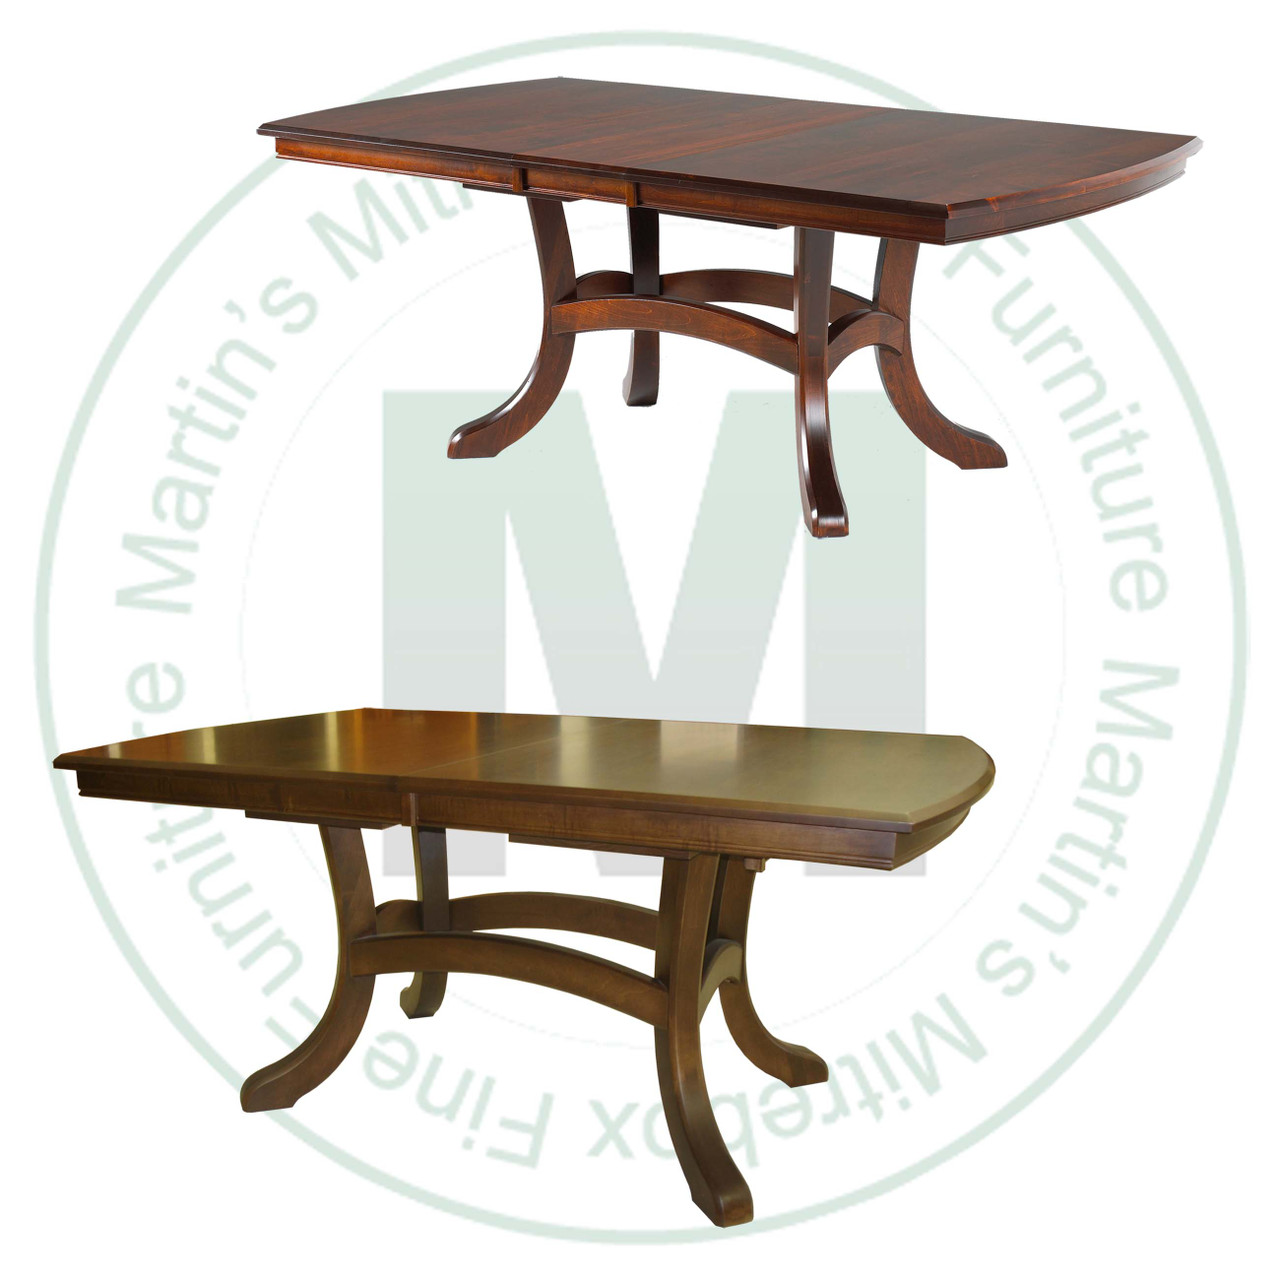 Maple Jordan Double Pedestal Table 48''D x 72''W x 30''H With 2 - 12'' Leaves. Table Has 1'' Thick Top